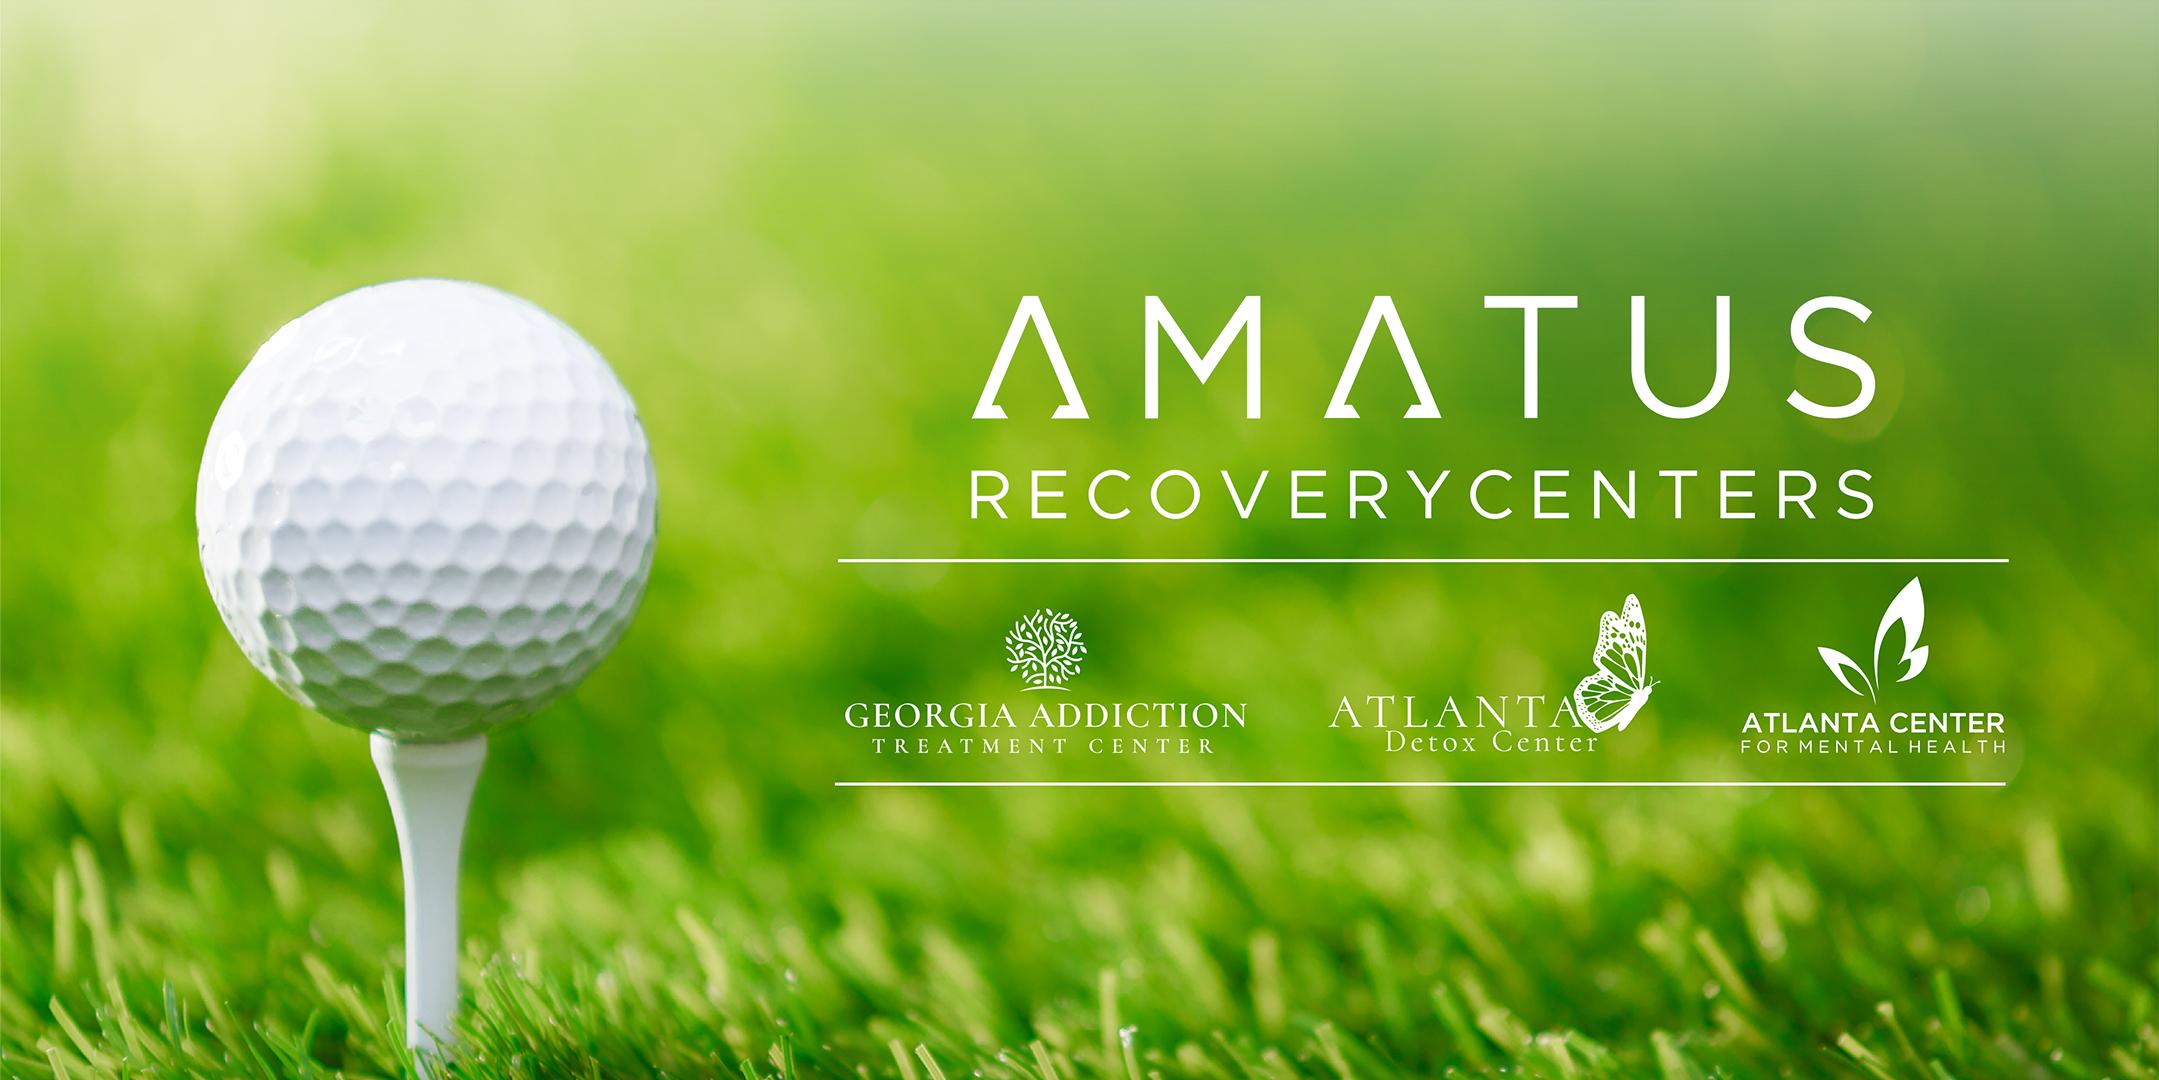 Amatus Golf Tournament at Whitewater Creek Country Club - September 24